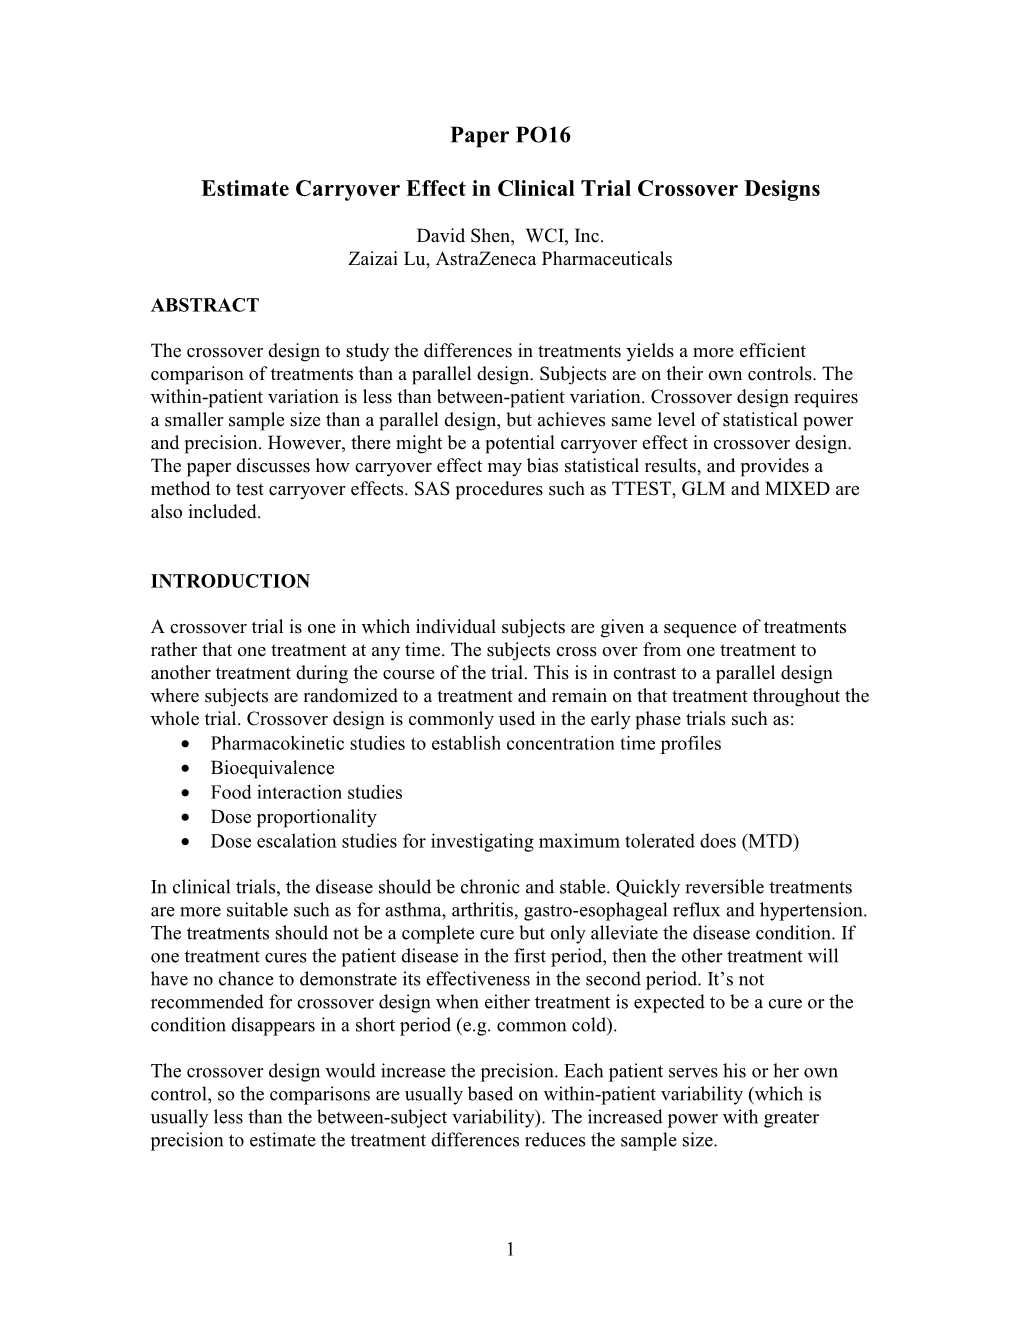 Estimate Carryover Effect in Clinical Trial Crossover Designs